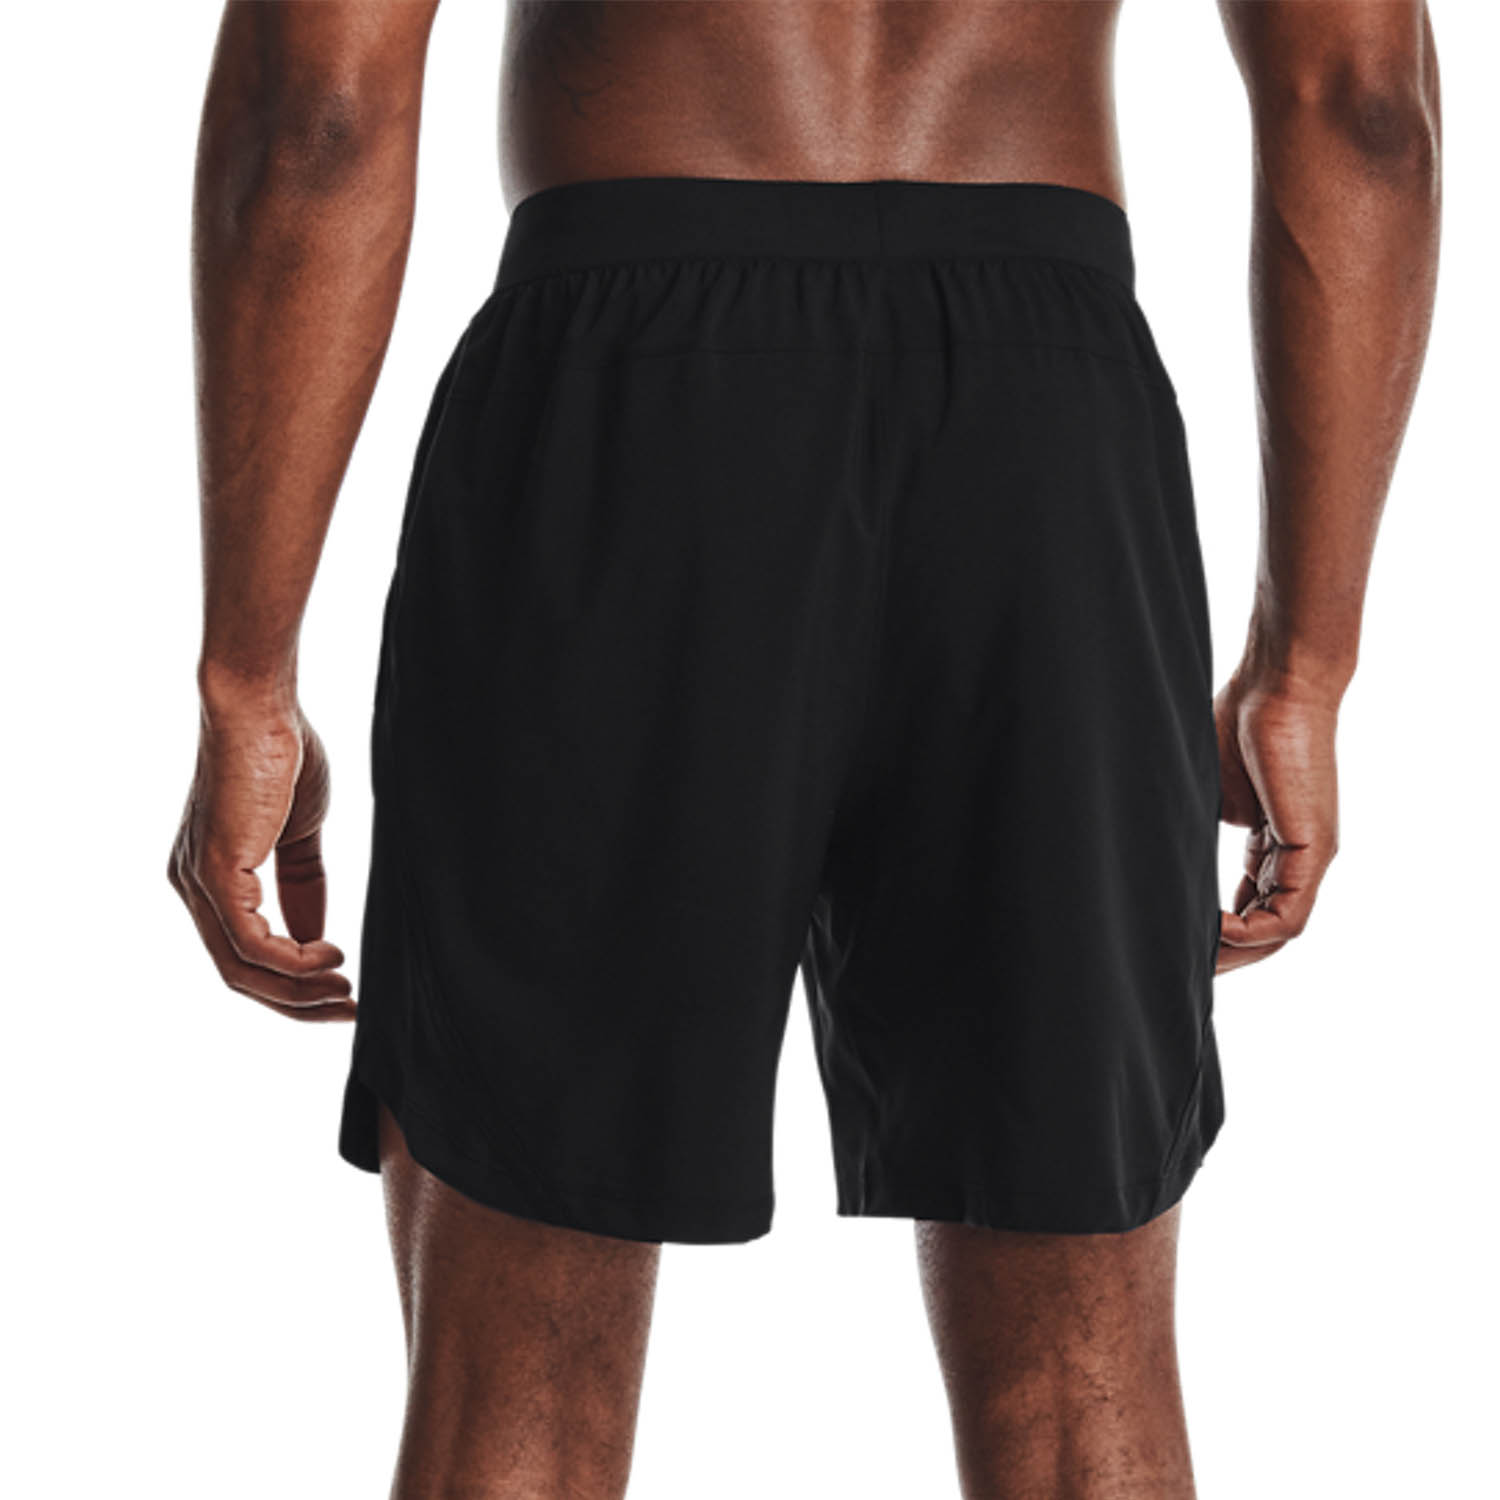 Under Armour Launch 7in Men's Running Shorts - Black/Reflective